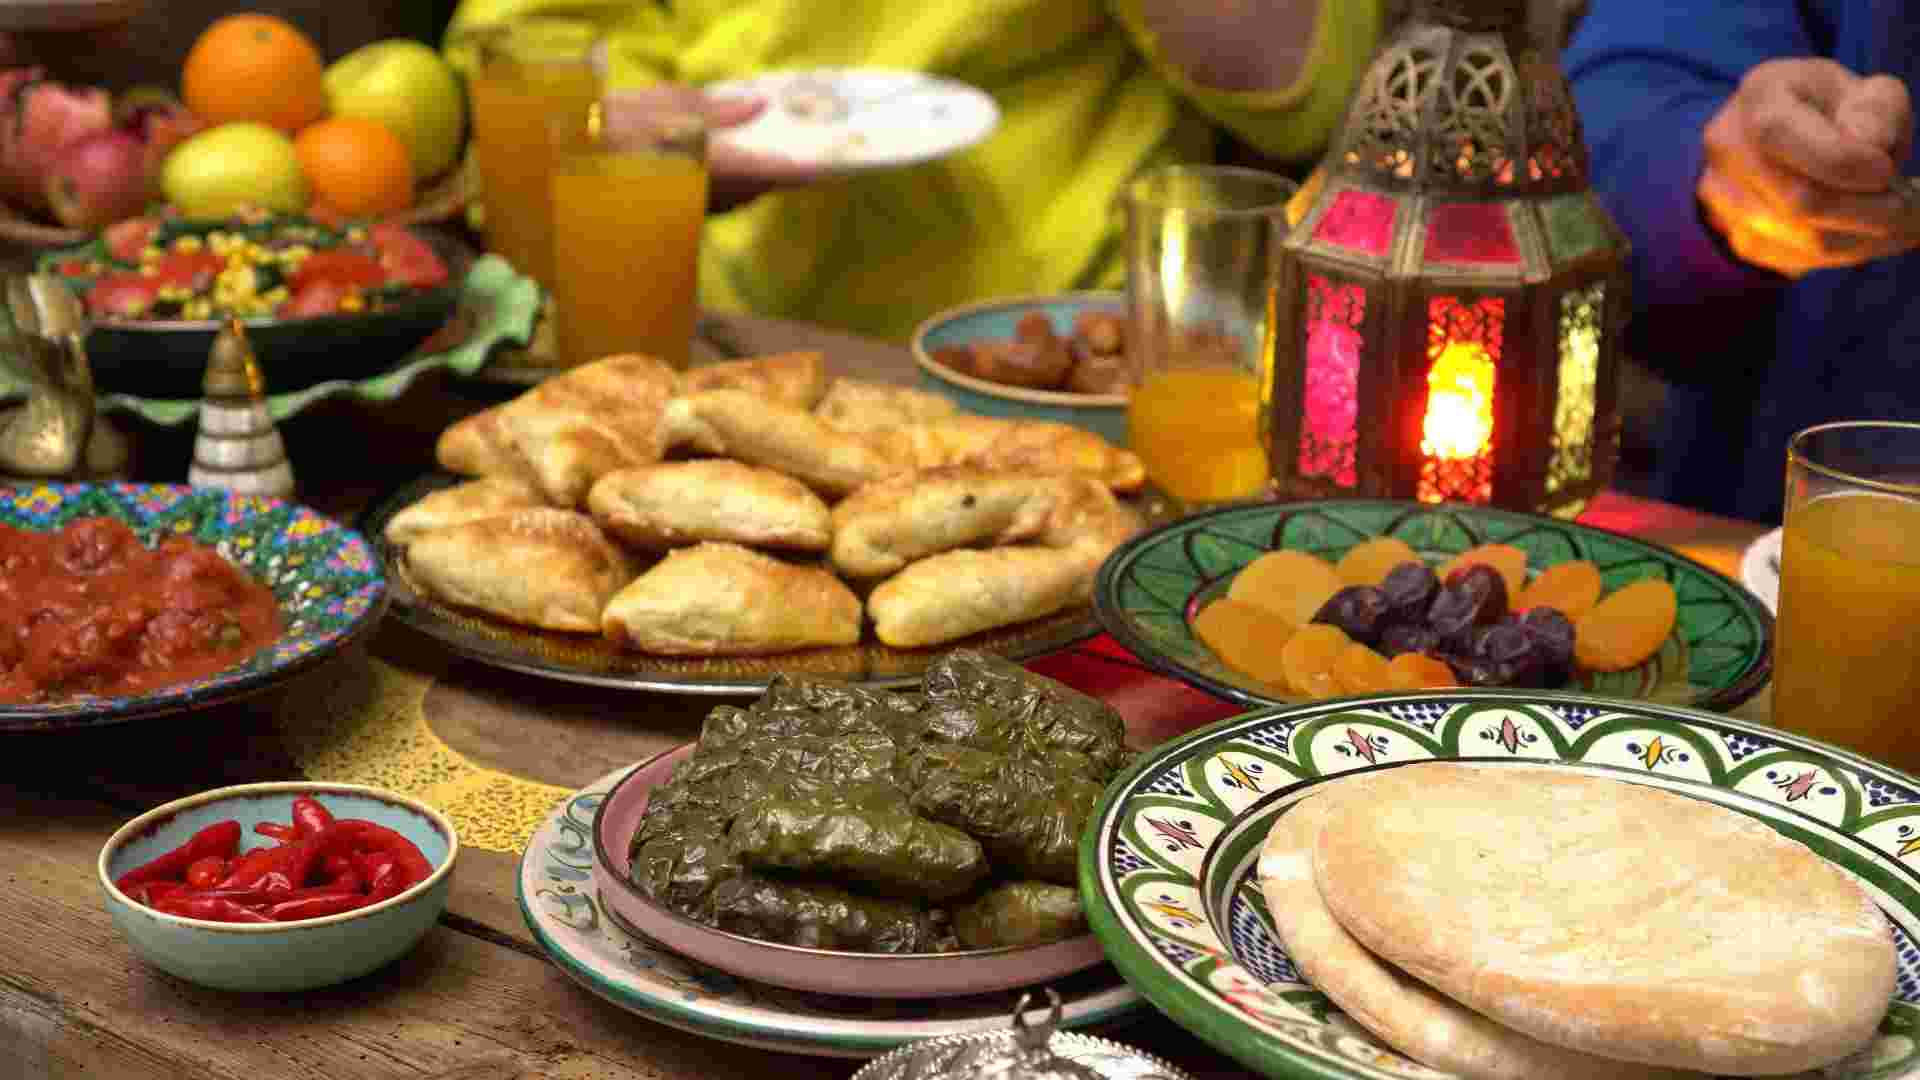 Things non-Muslims need to know when invited to an Iftar